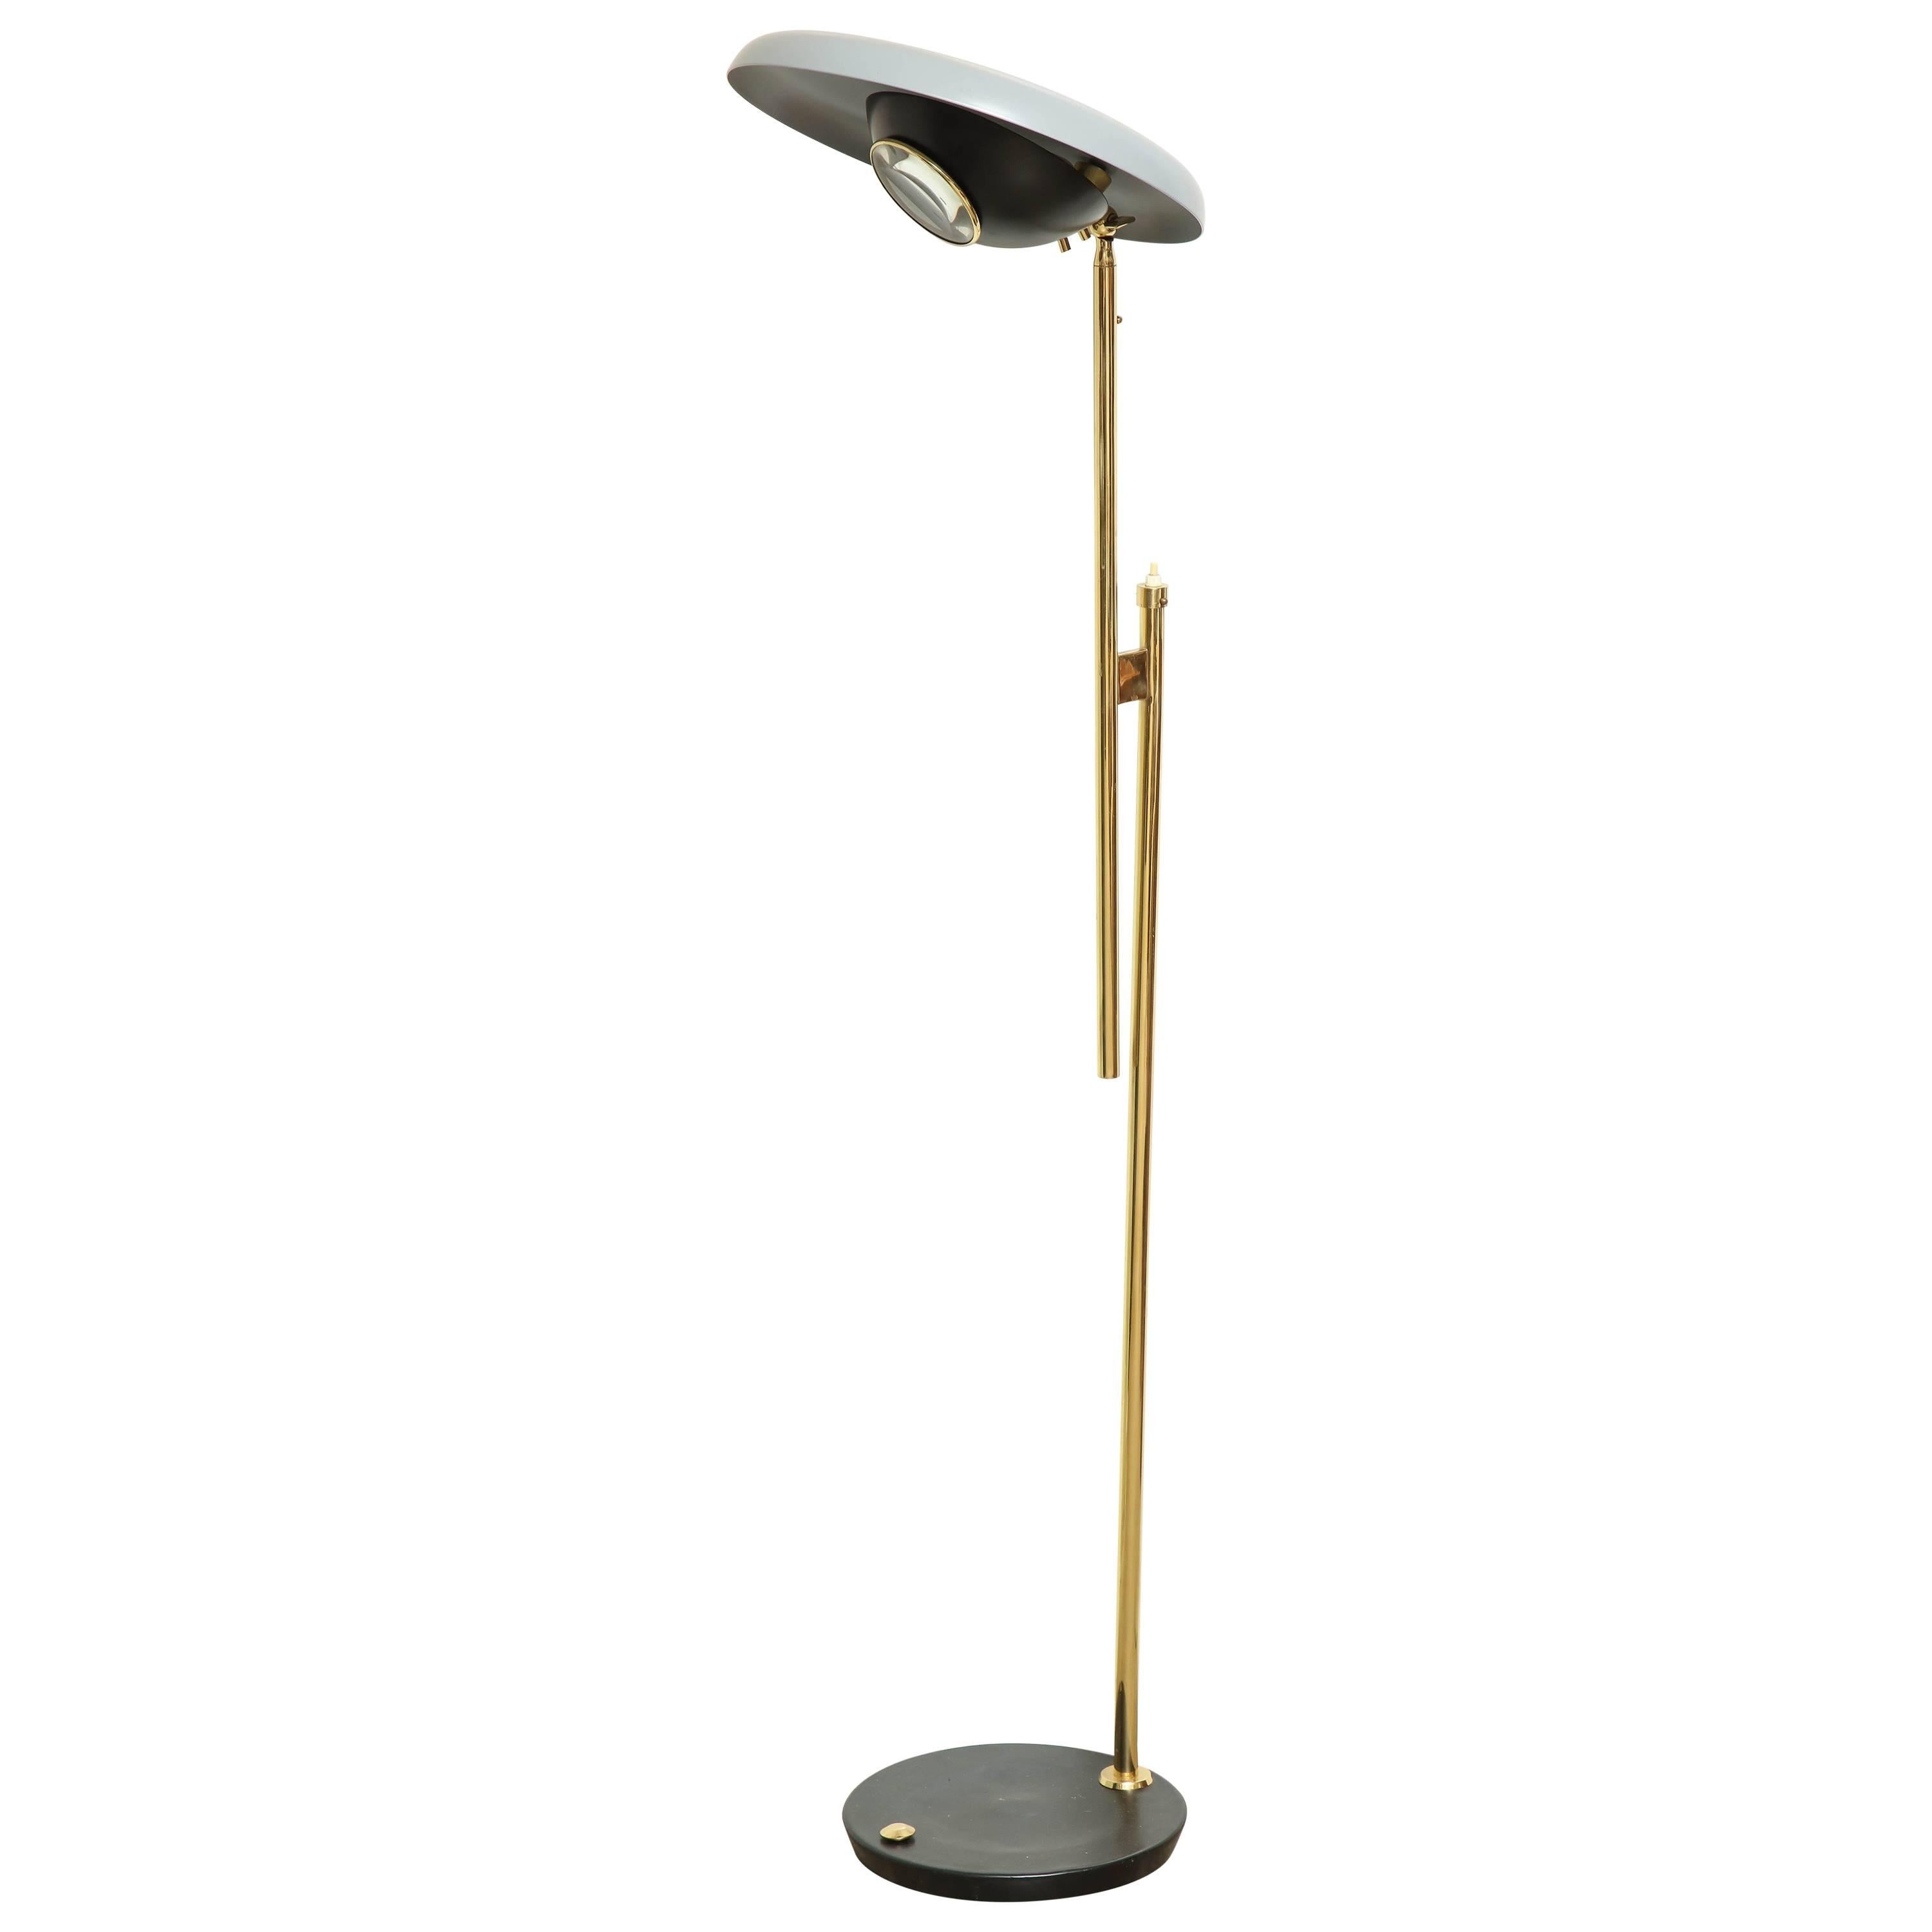 Oscar Torlasco Floor Lamp, Made by Lumi in Italy, 1955 For Sale